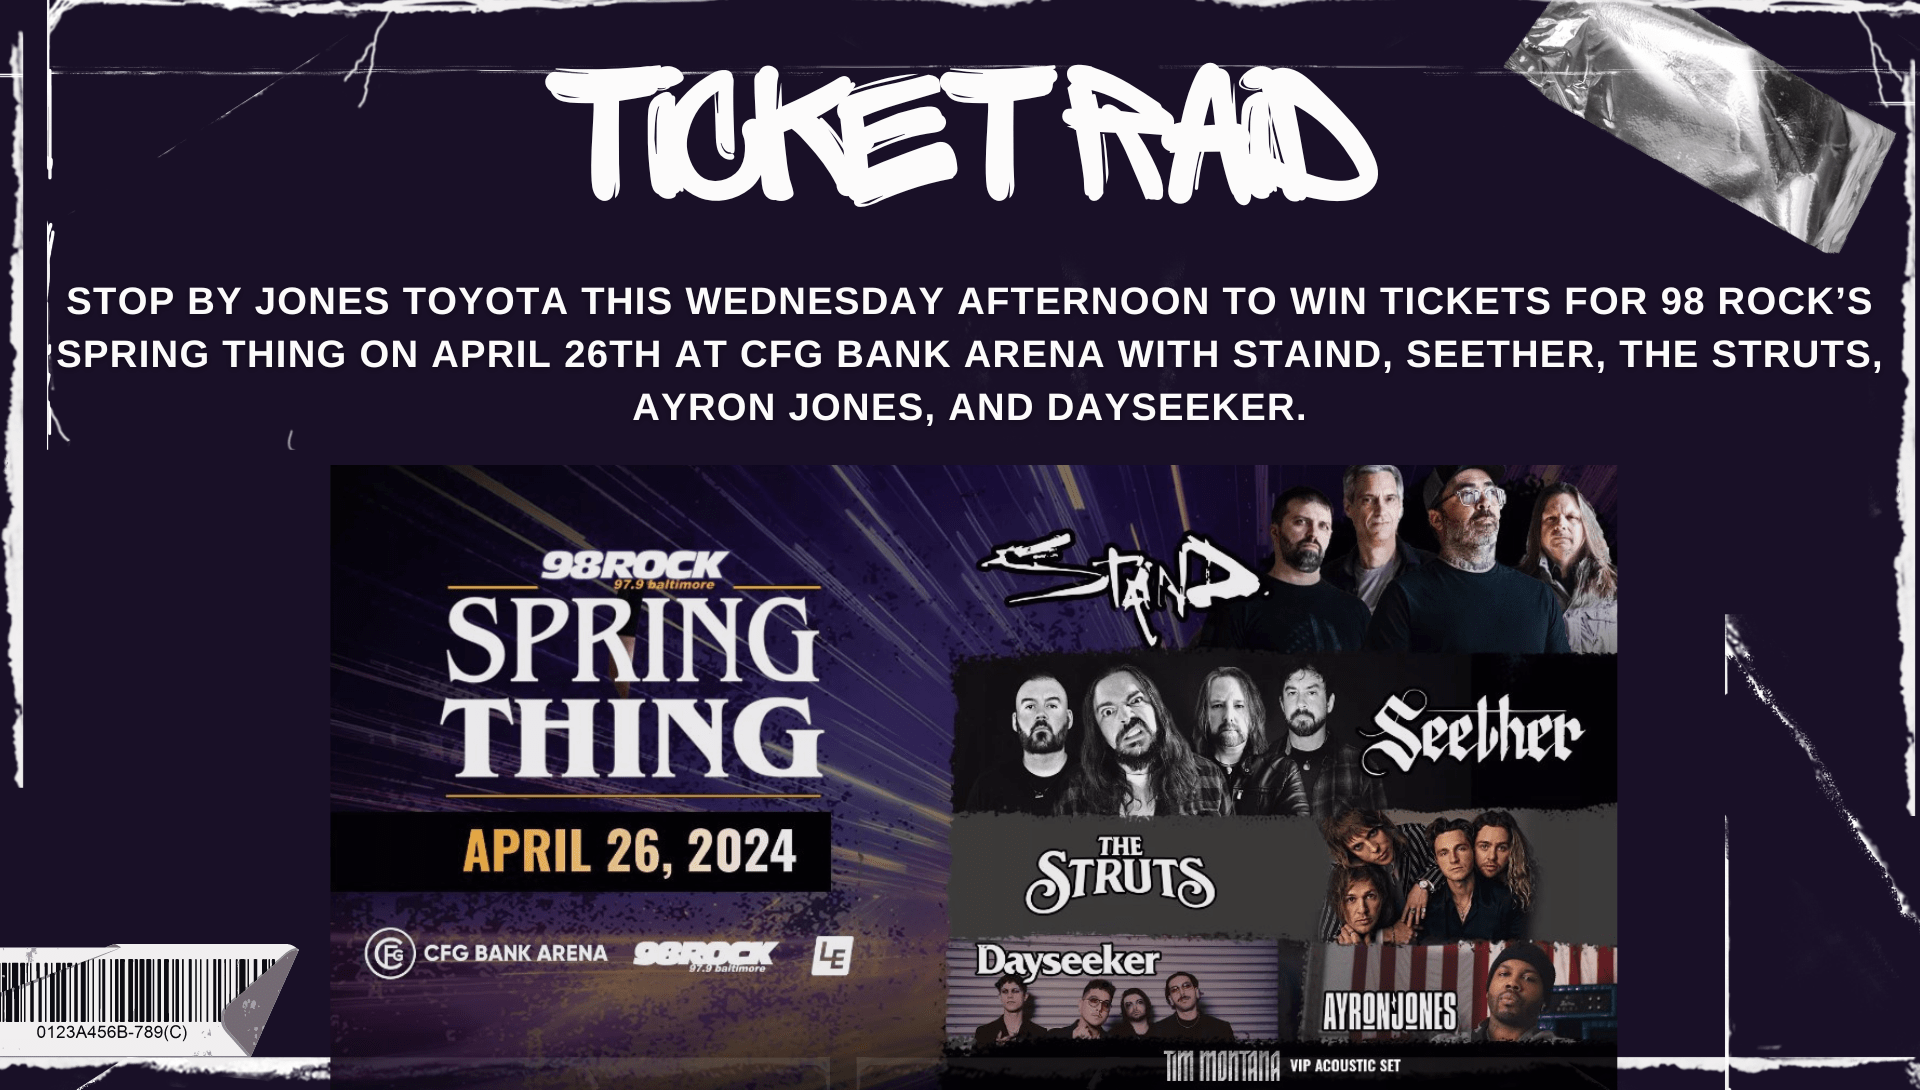 It’s a 98 Rock Ticket Raid! Stop by Jones Toyota this Wednesday afternoon to win tickets for 98 ROCK’s SPRING THING April 26th at CFG Bank Arena with STAIND, SEETHER, THE STRUTS, AYRON JONES, and DAYSEEKER. The 98 ROCK Street Team will be on hand to give away a pair of Reserved Seats every 15 minutes between 5pm-7pm!